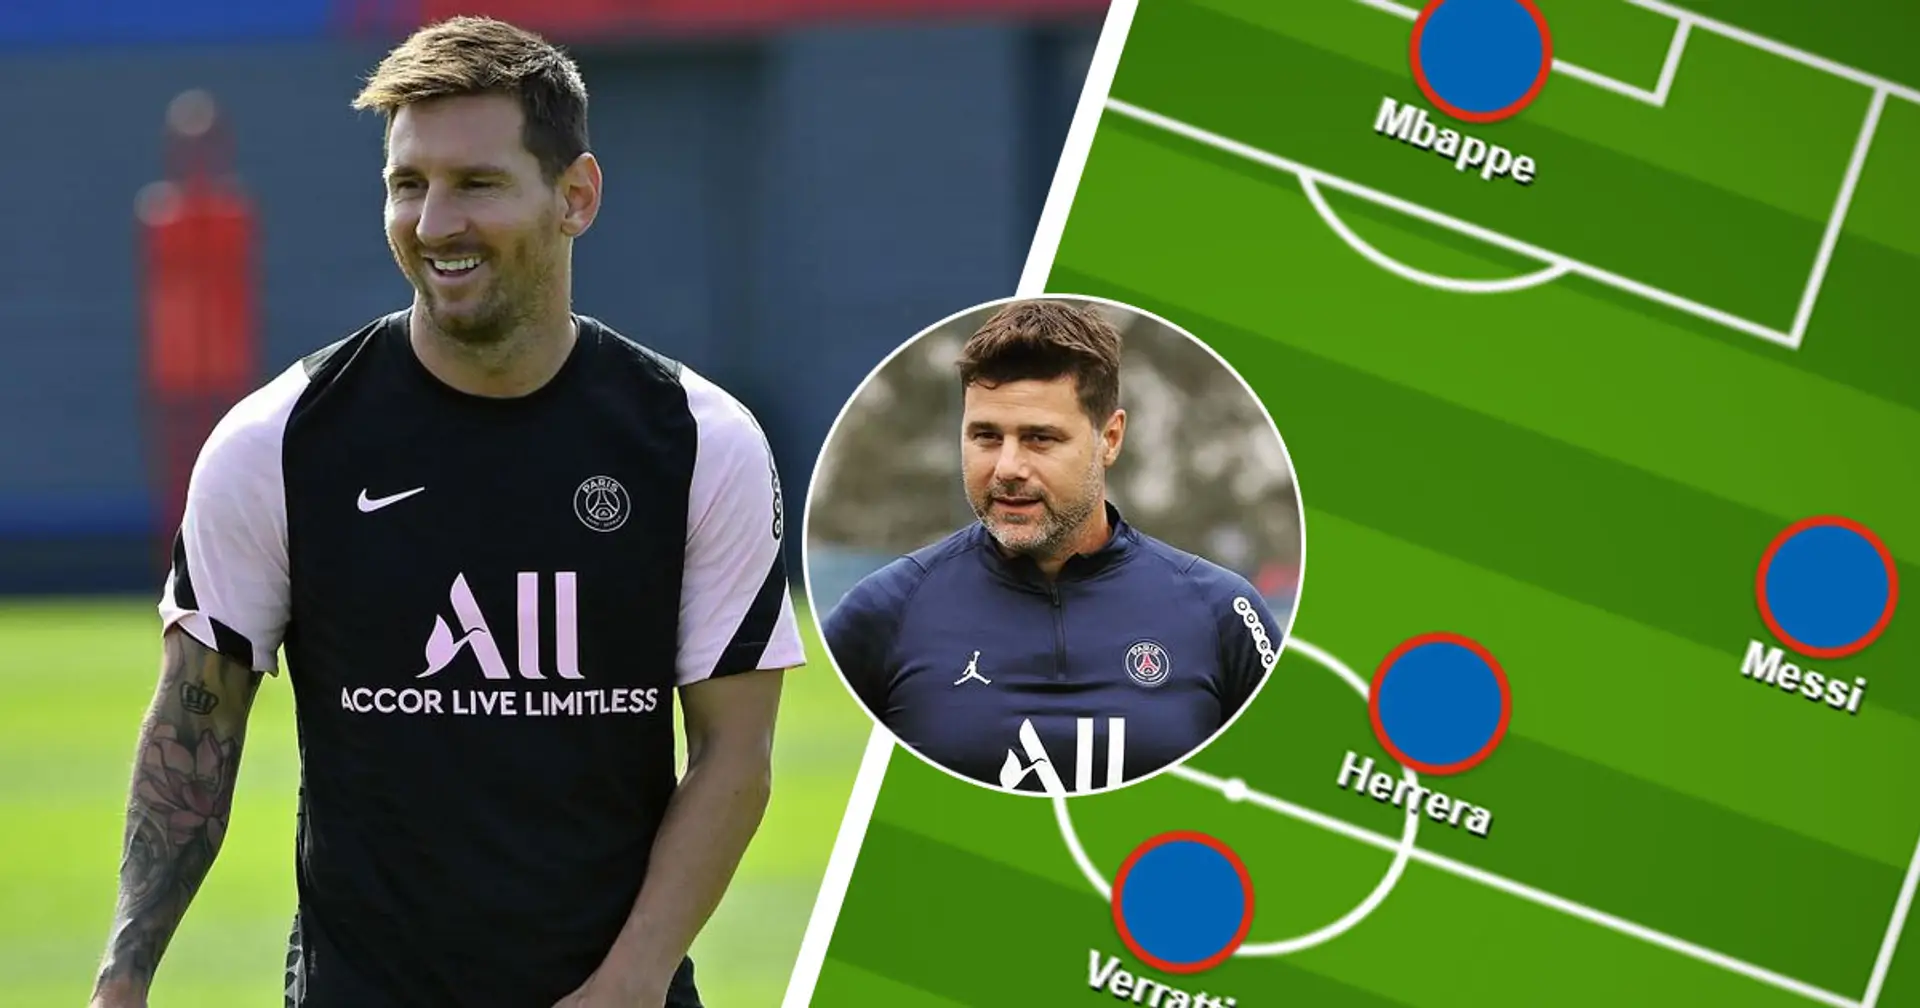 Time for Messi debut? Select ultimate XI for Strasbourg clash from 3 options